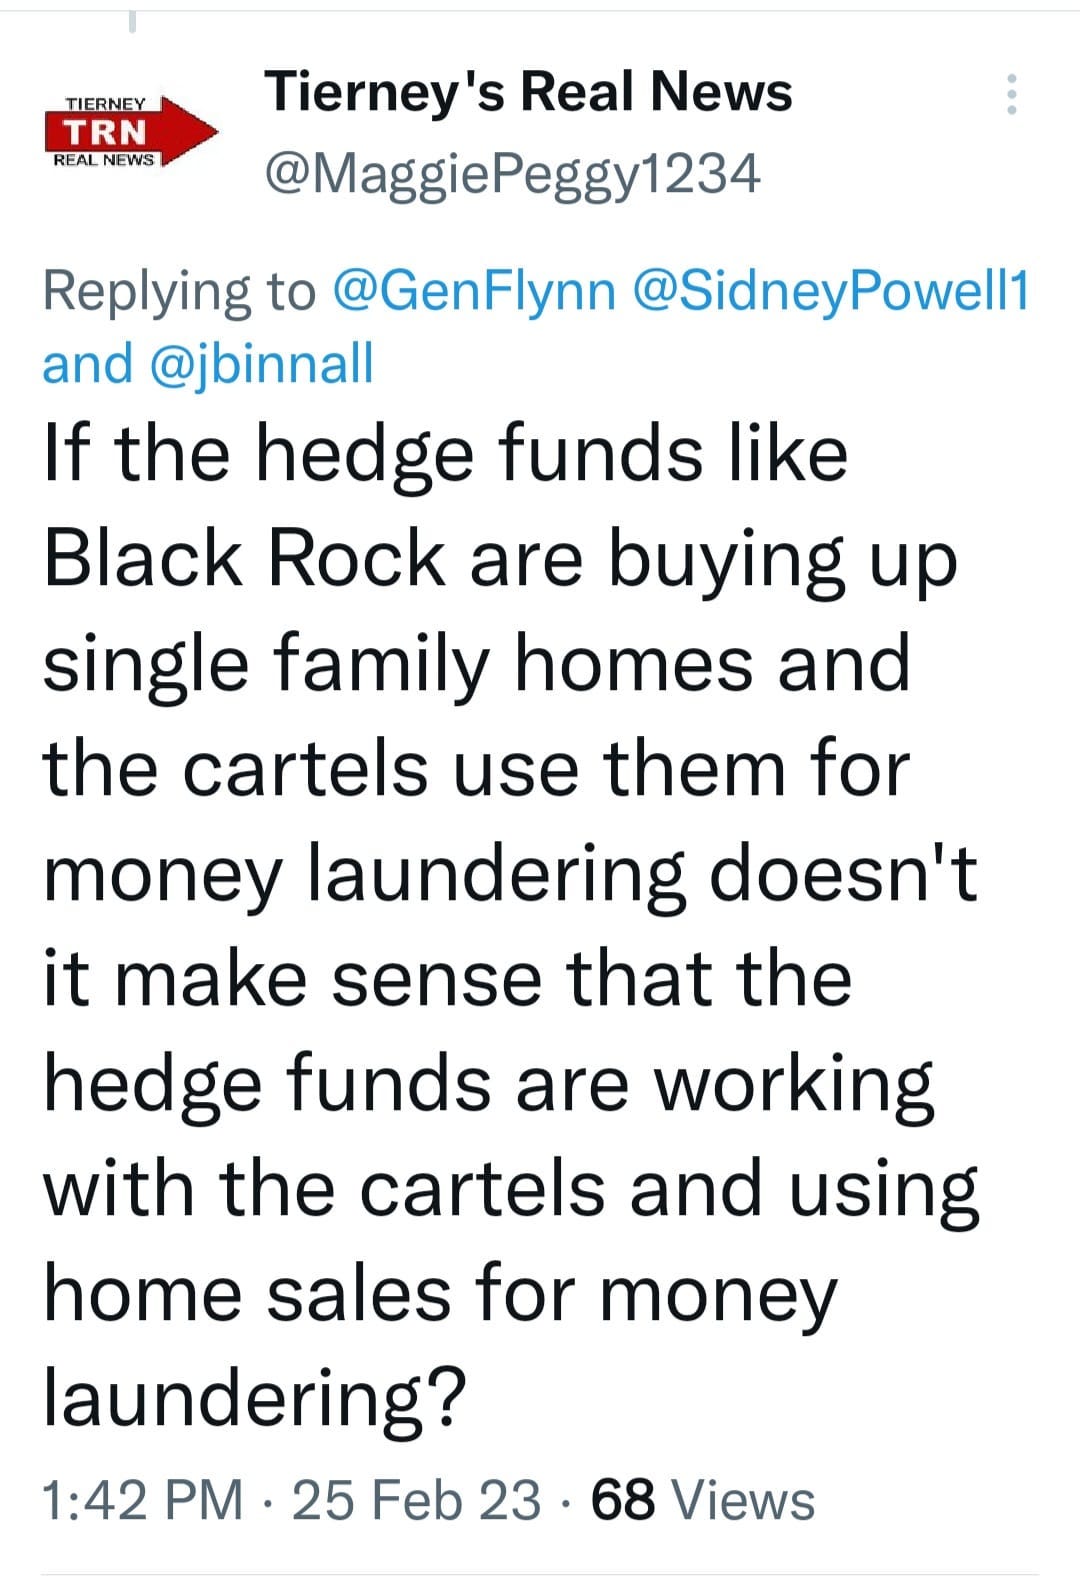 May be a Twitter screenshot of text that says 'TIERNEY TRN REAL NEWS Tierney' Real News @MaggiePeggy123 Replying to @GenFlynn @SidneyPowell1 Powell1 and @jbinnall If the hedge funds like Black Rock are buying up single family homes and the cartels use them for money laundering doesn't it make sense that the hedge funds are working with the cartels and using home sales for money laundering? 1:42 PM. 25 Feb 23. .68 Views'